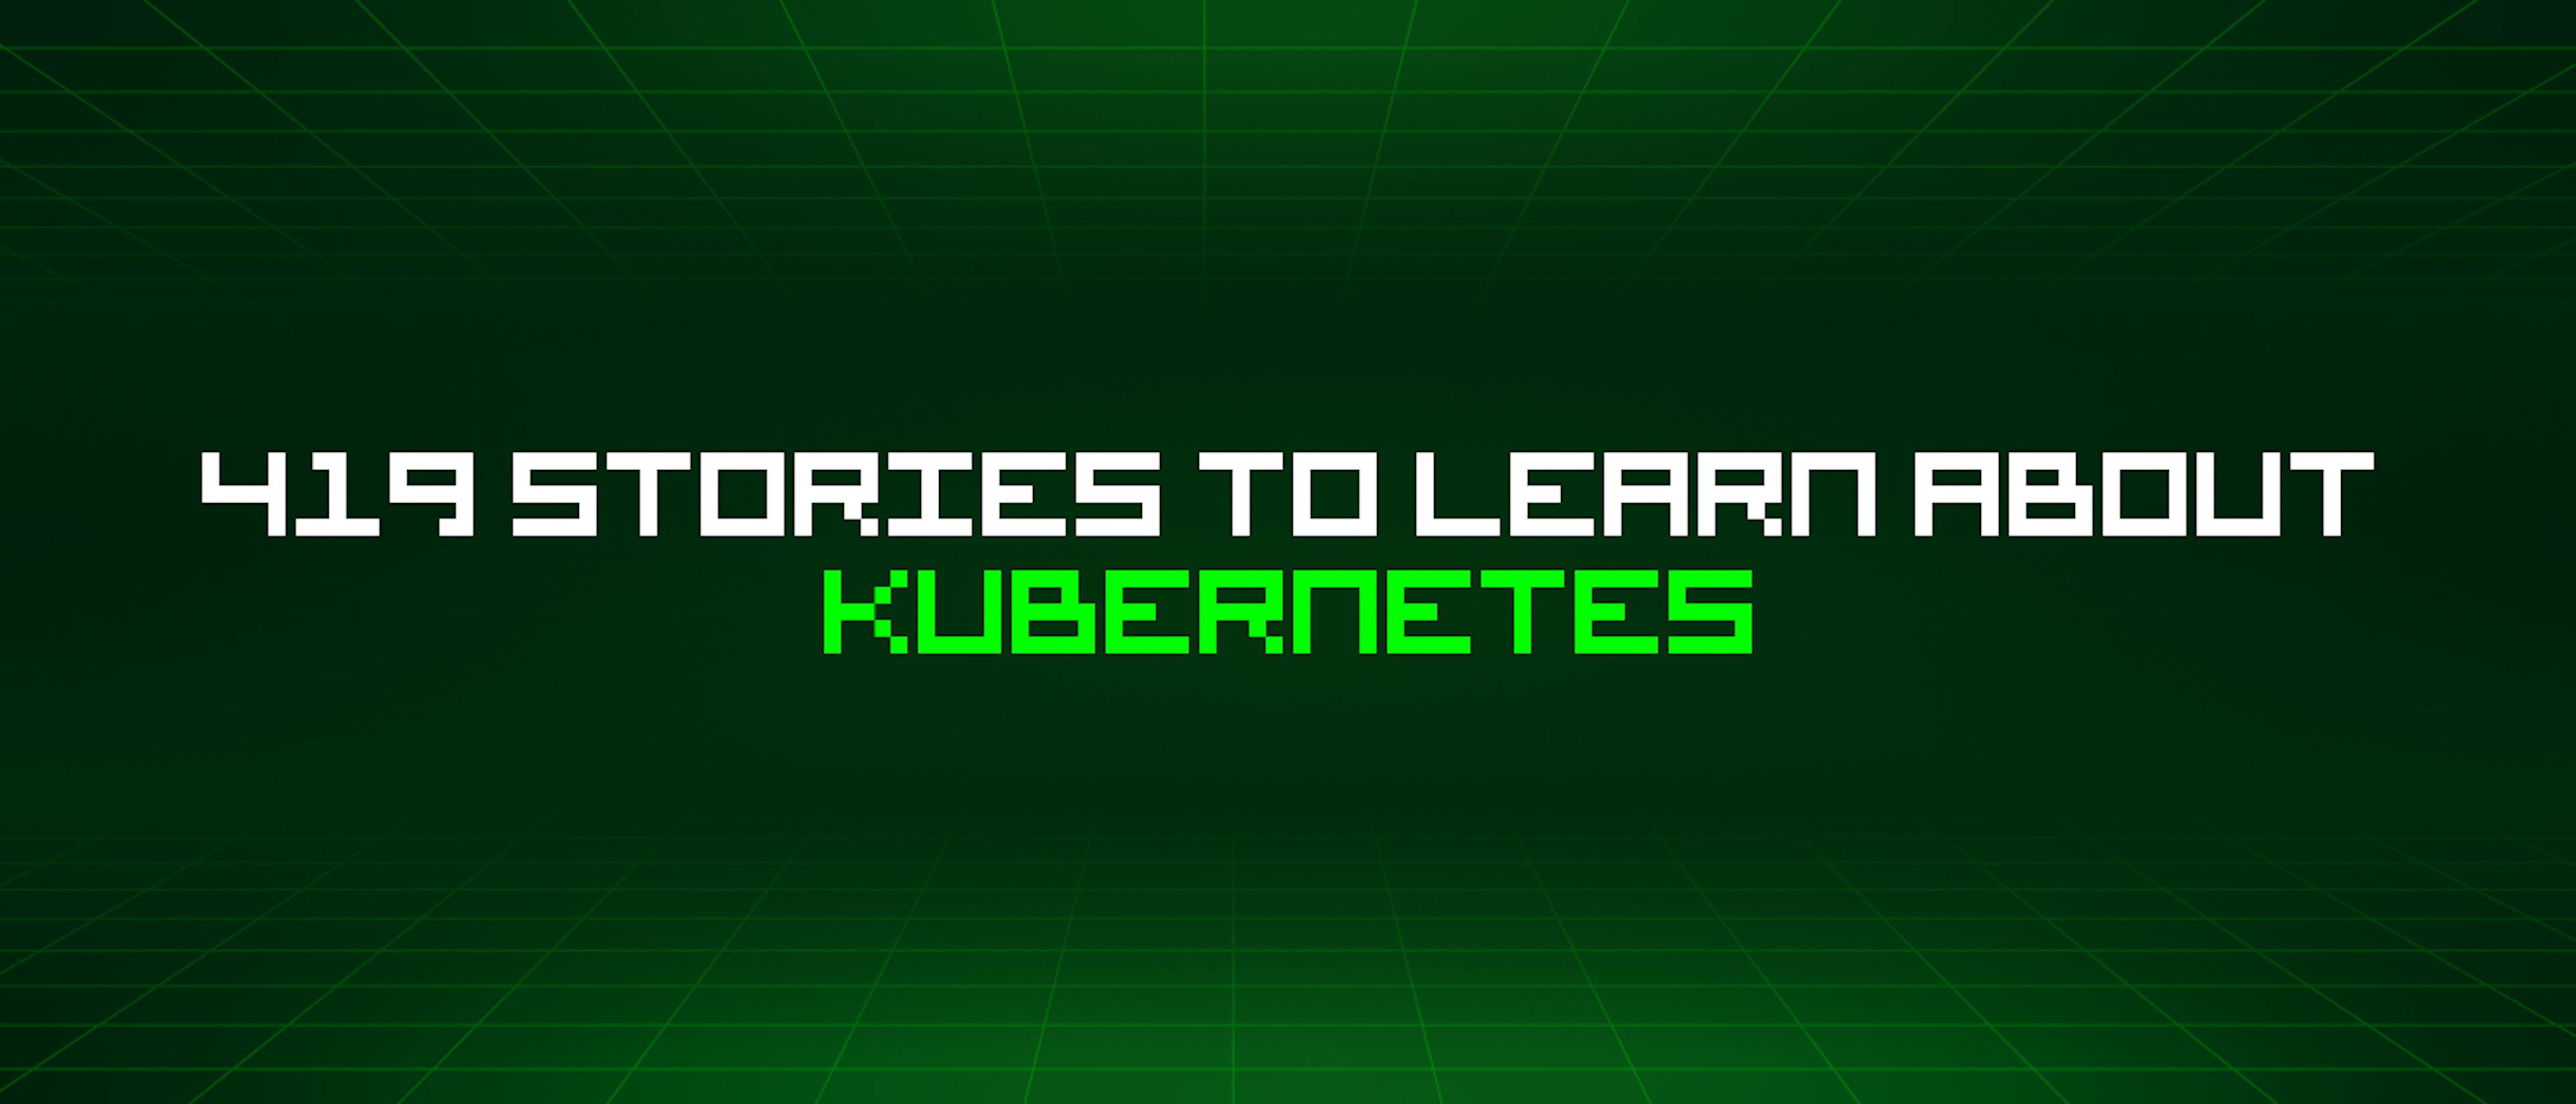 featured image - 419 Stories To Learn About Kubernetes